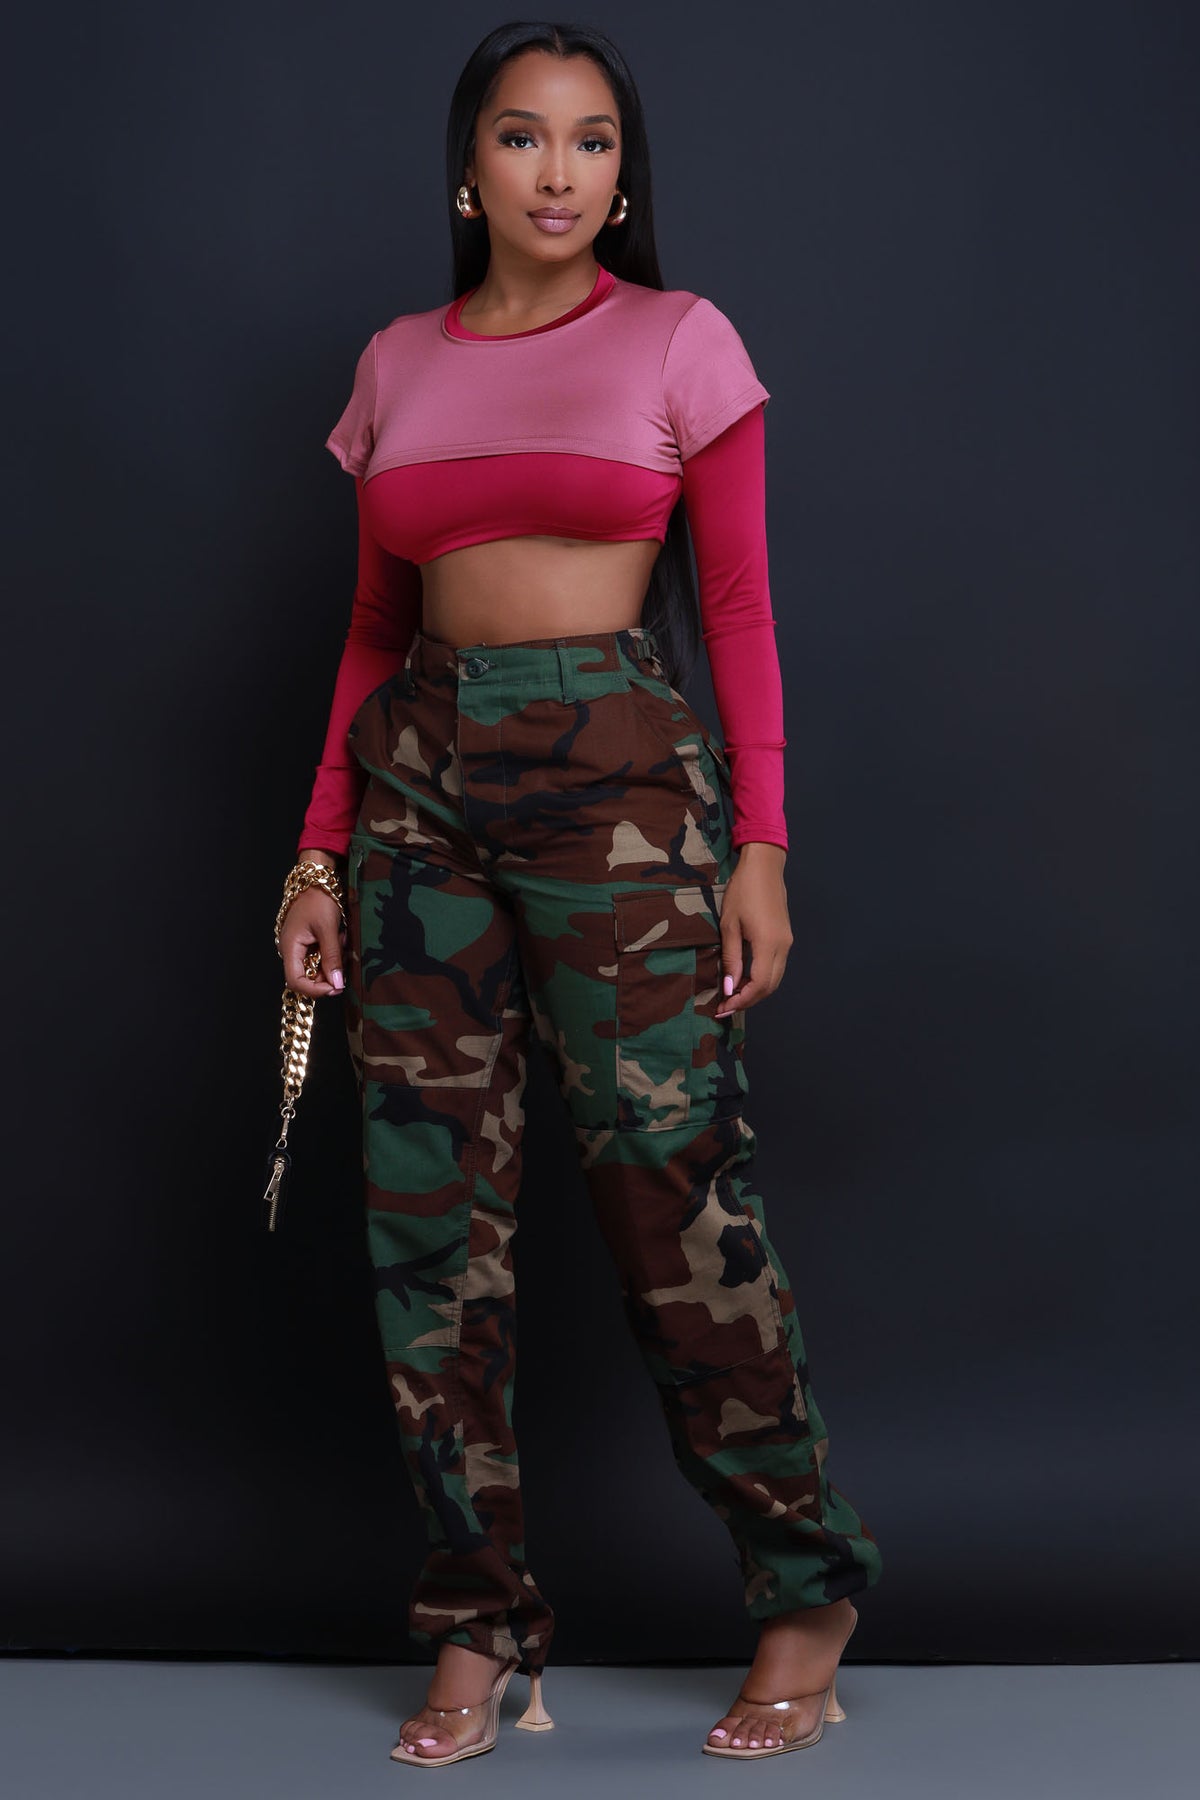 
              Dig Deeper Double Layer Crop Top - Pink/Pink - Swank A Posh
            